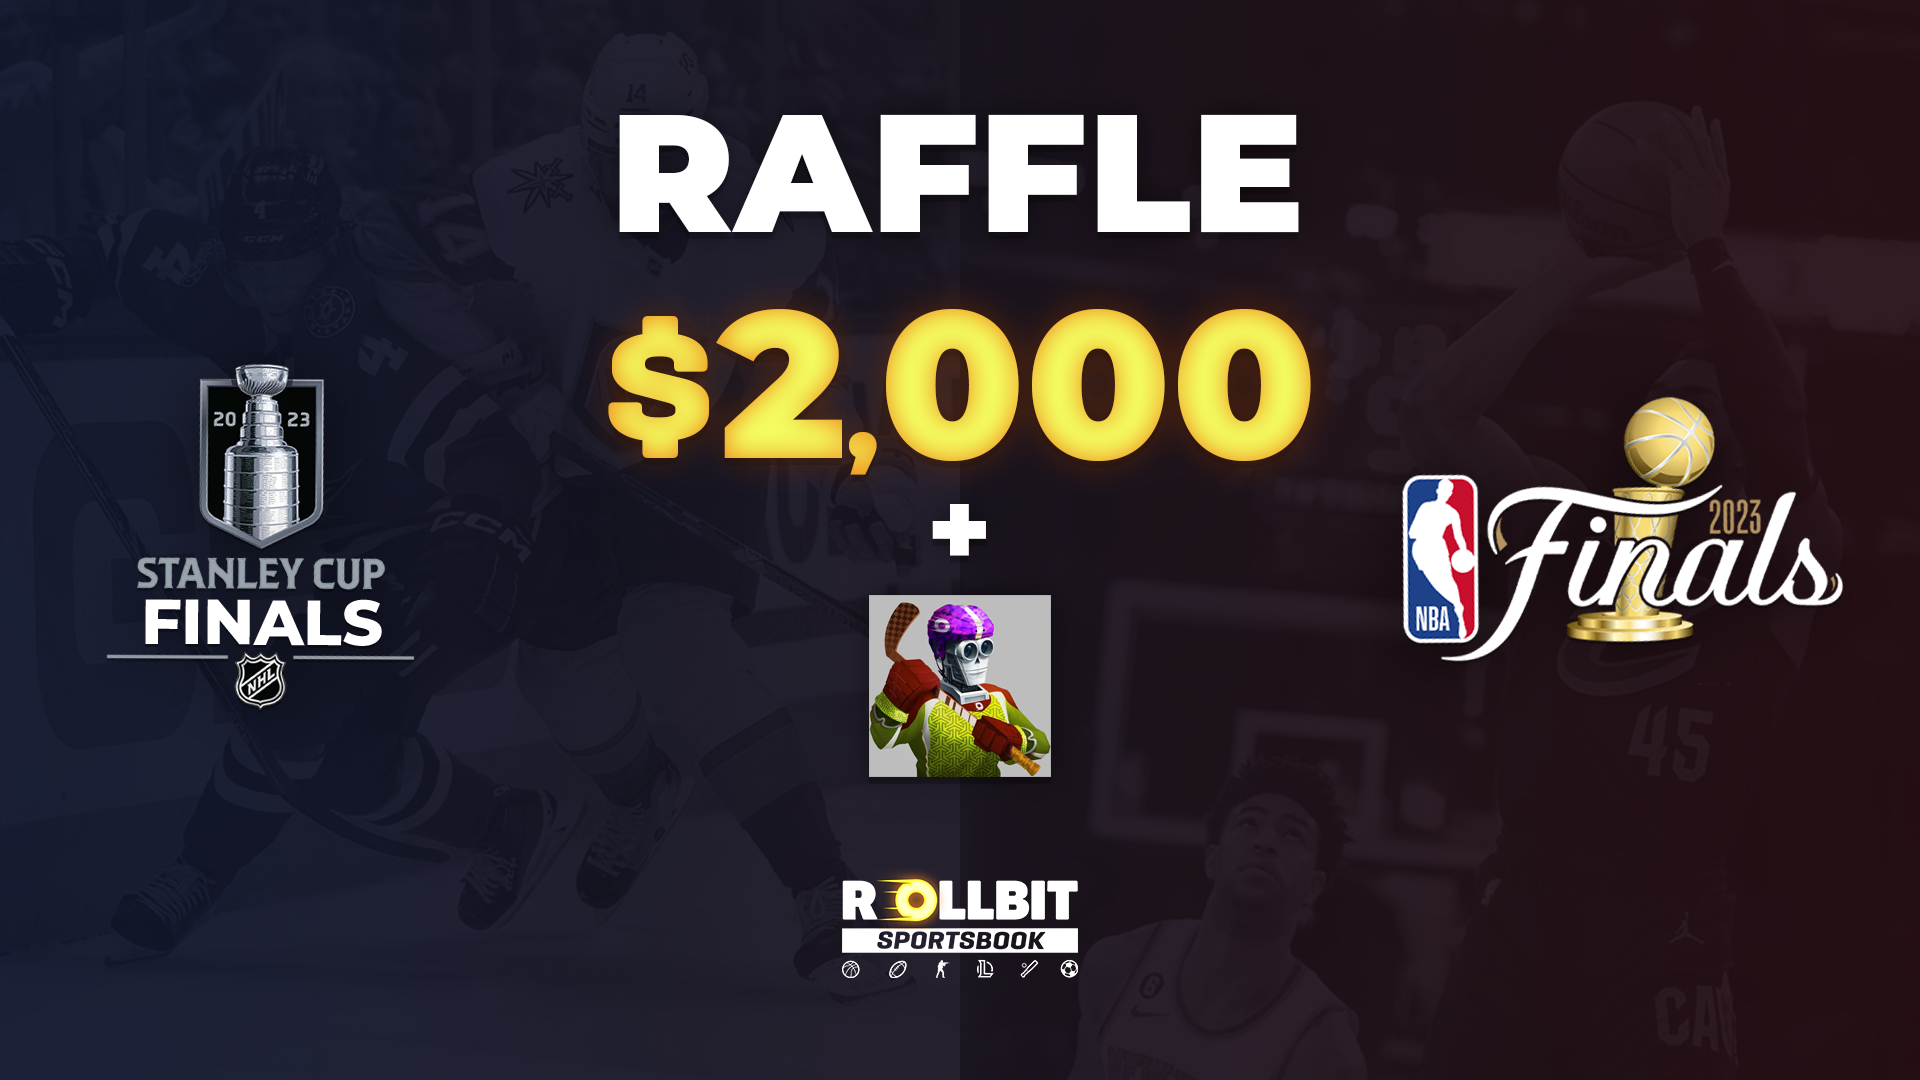 NBA & Stanley Cup finals - $2000 & Sports Rollbot raffle!